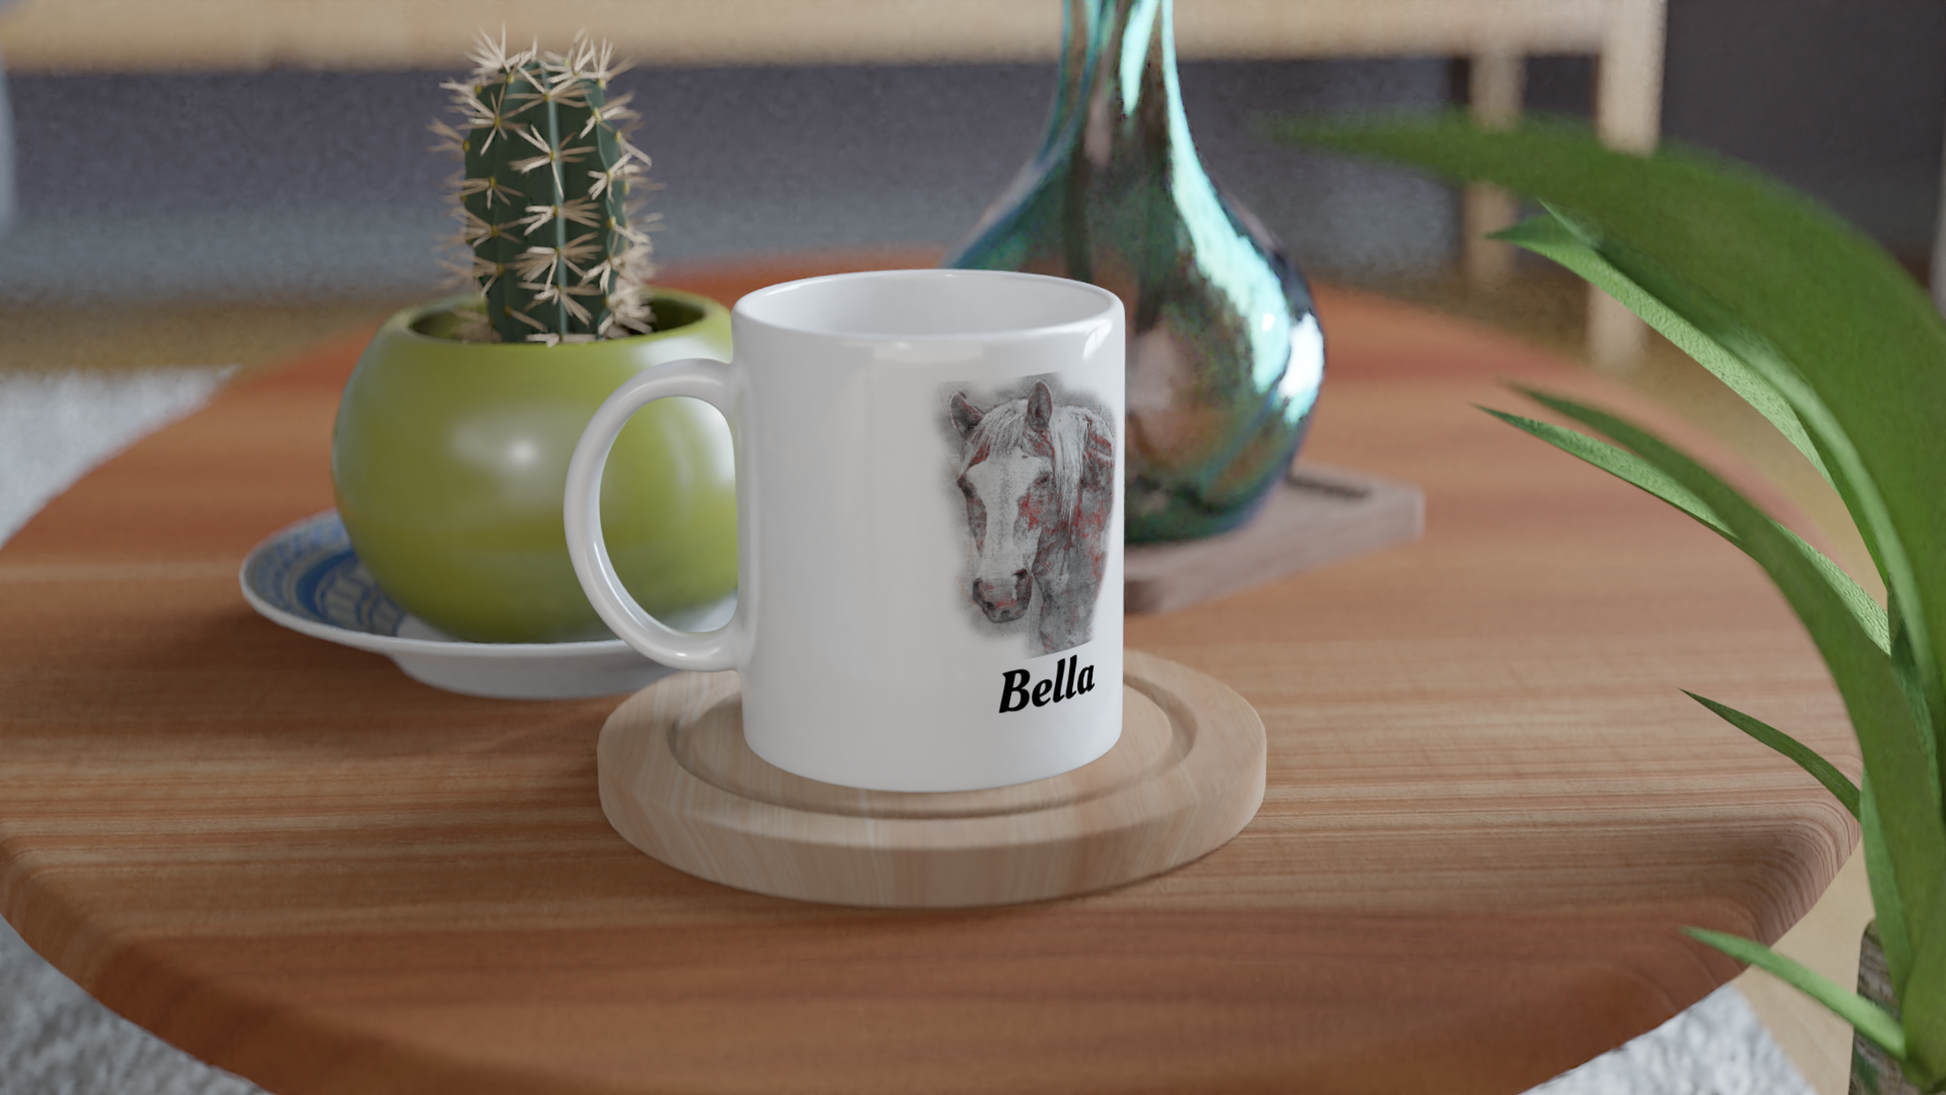 Hand Drawn Horse || 11oz Ceramic Mug - Pencil Drawing - Personalized; Personalized with your horse